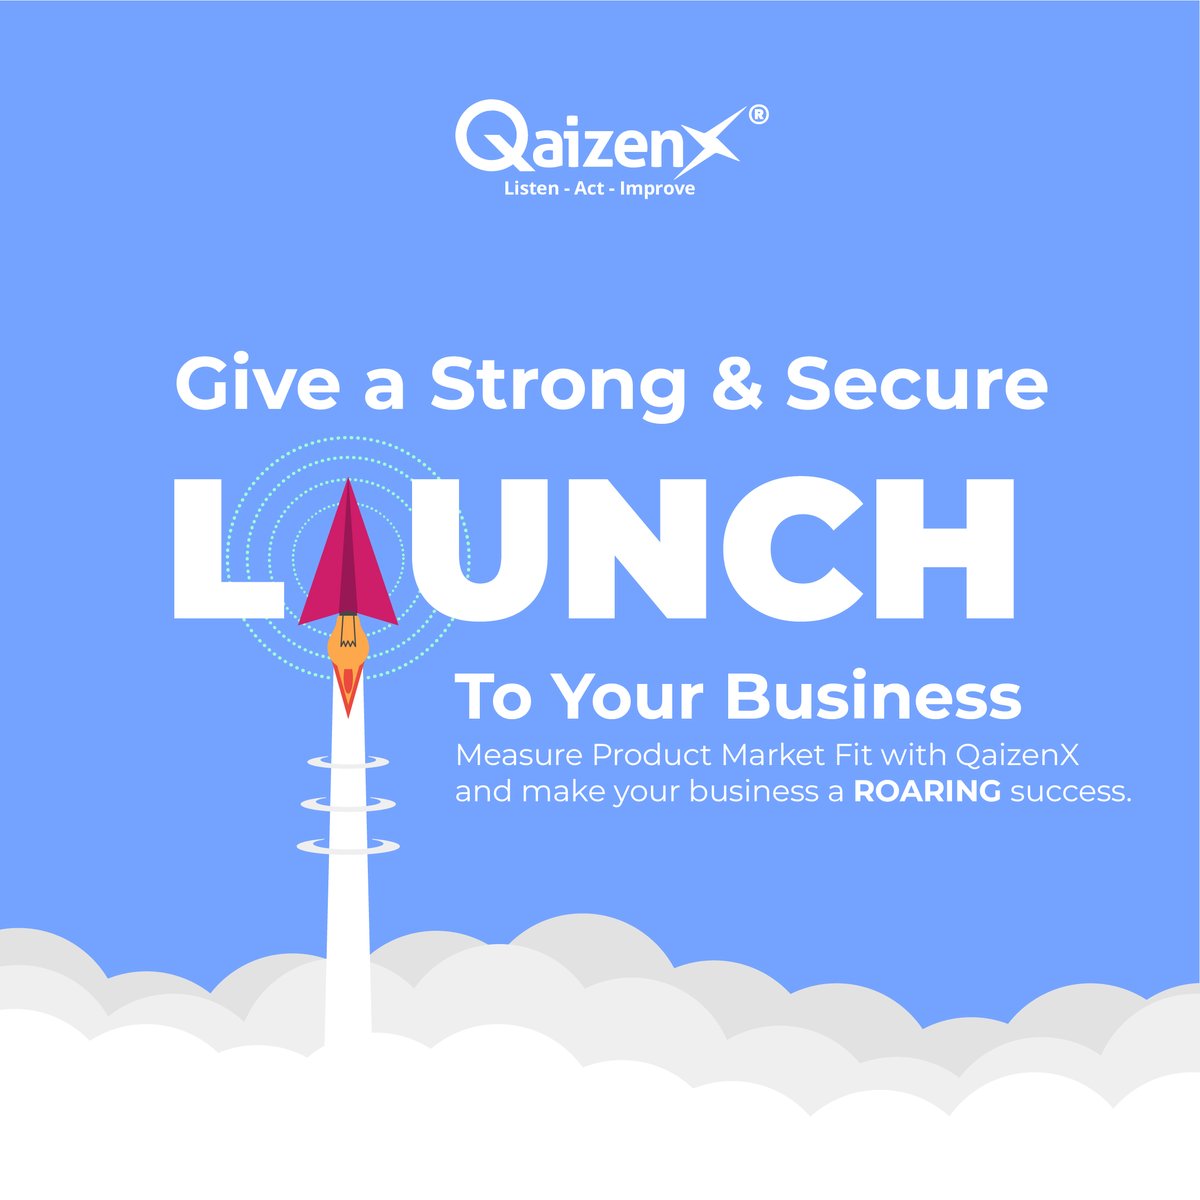 🚀 Launch your business with confidence! Measure your Product Market Fit with QaizenX. Request a demo today! qaizenx.com/product-market…

#BusinessGrowth #StartUp #BusinessSuccess #ProductMarketFit #QaizenX